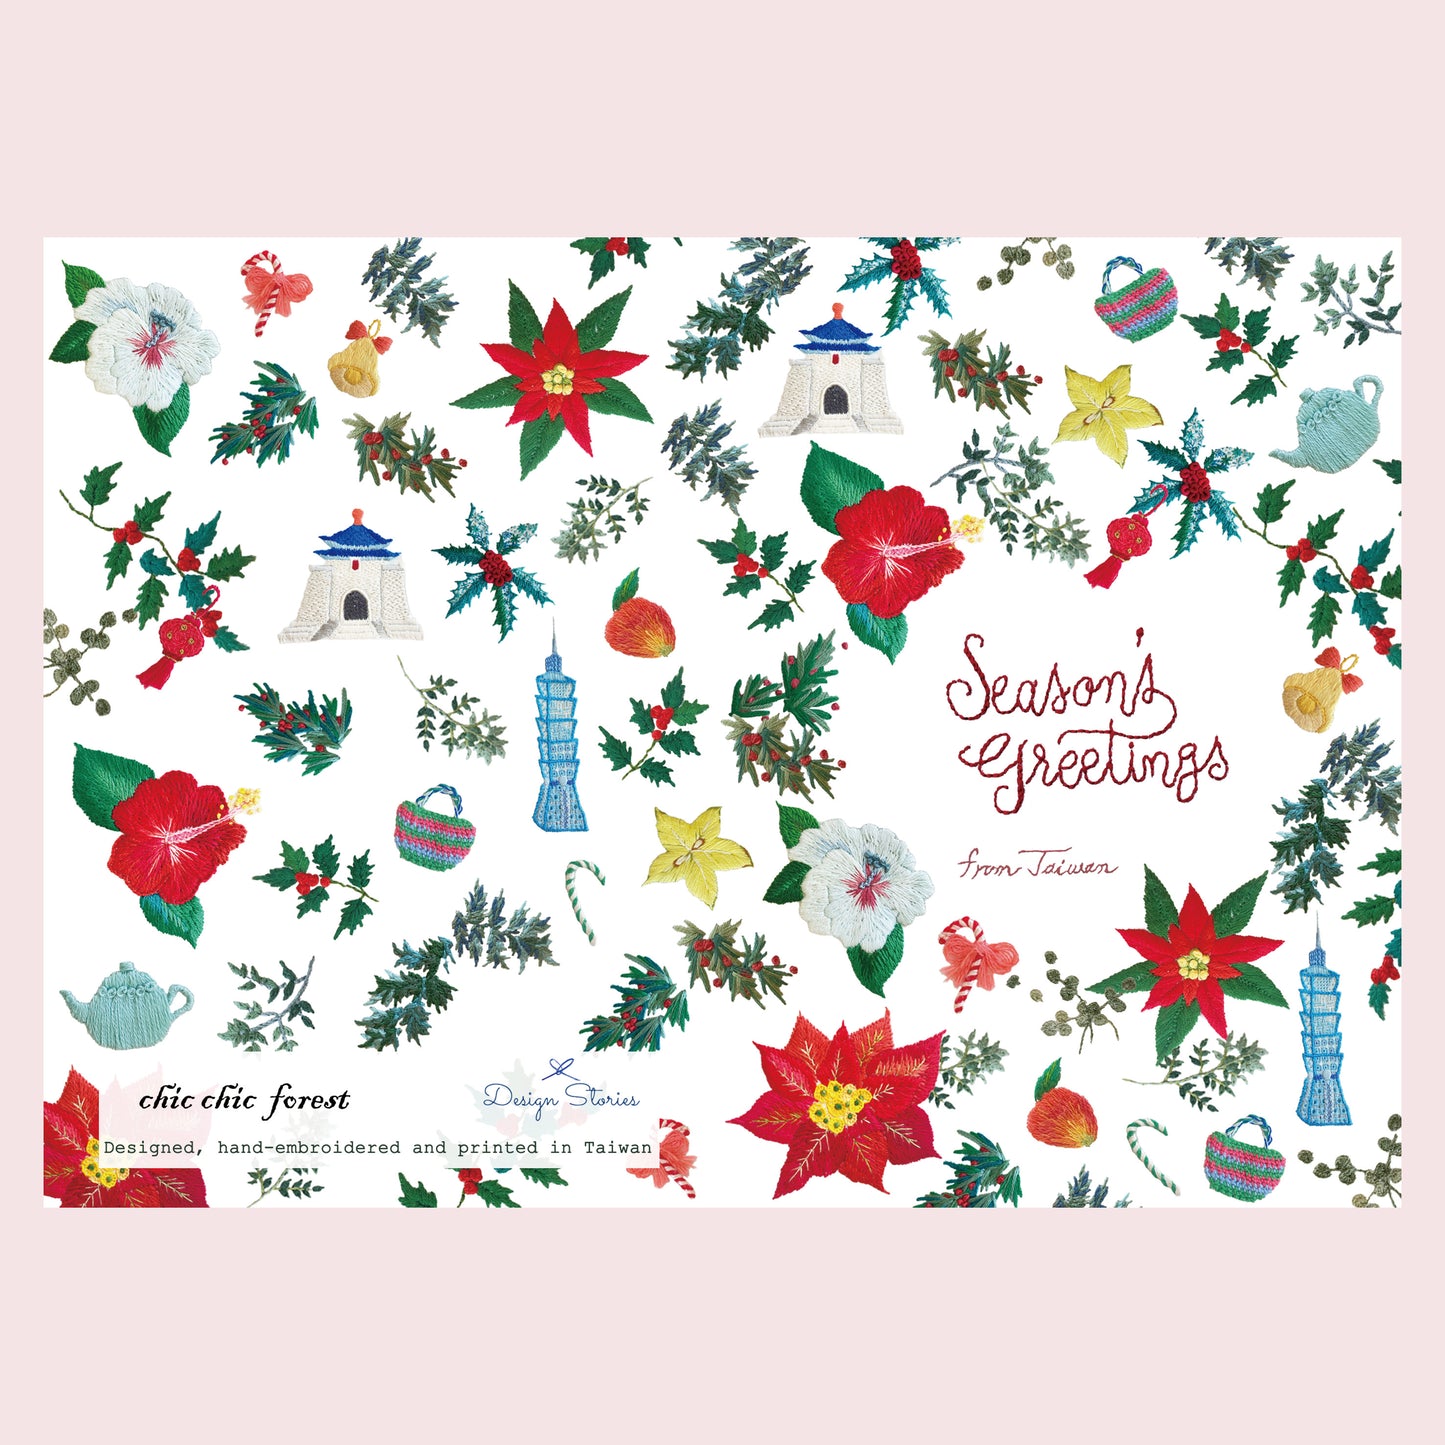 New⭐️ Hand-Embroidered Design Taiwan Christmas card